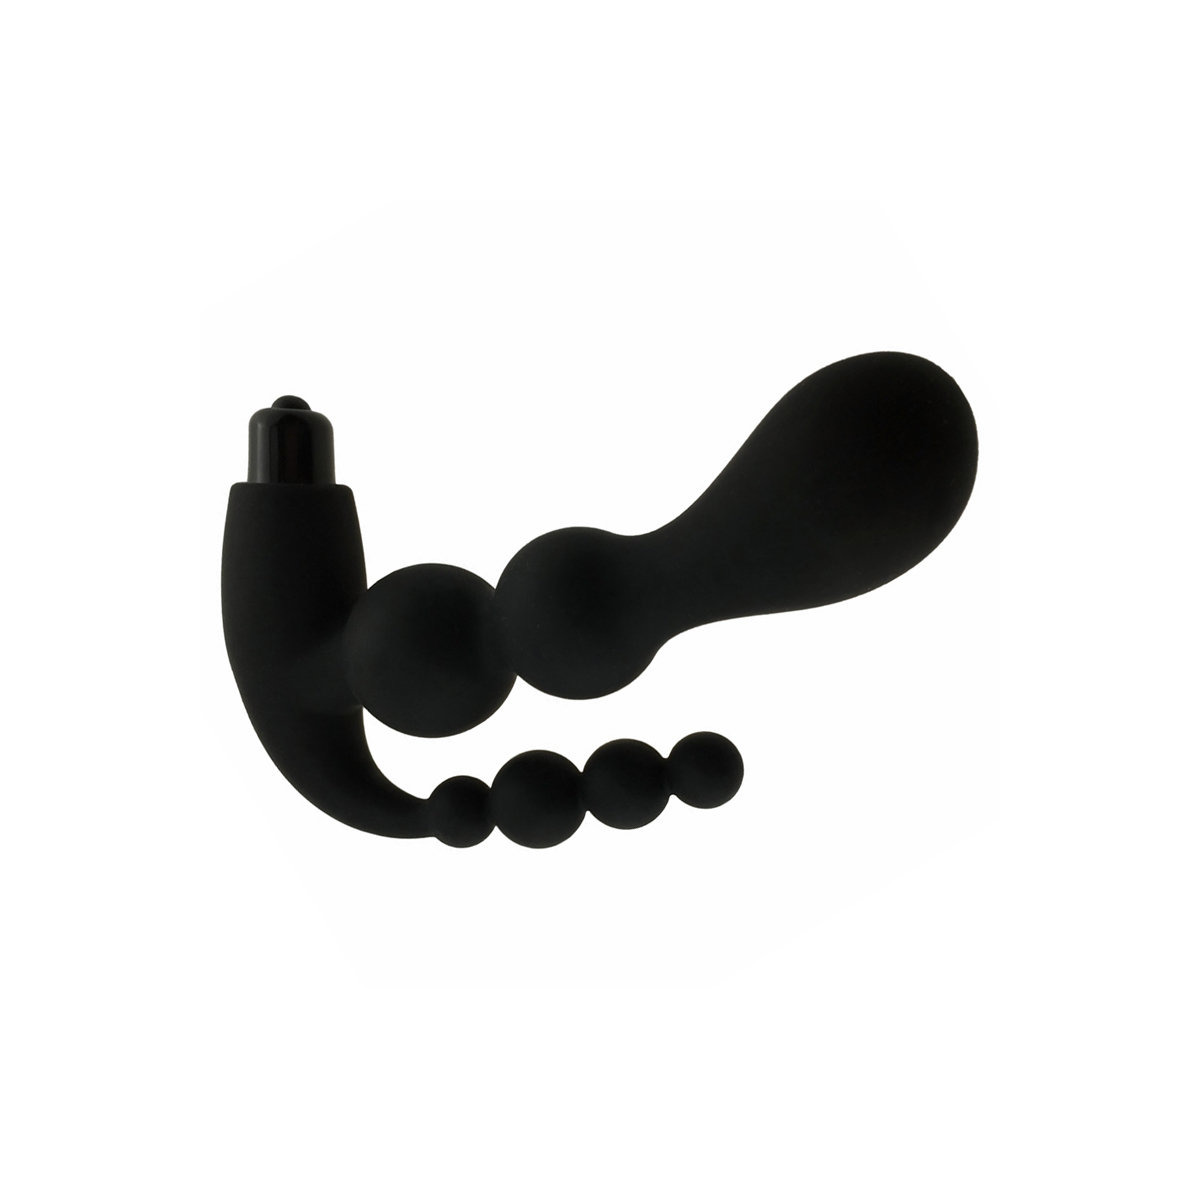 Extra Long Anal Beads With Strong Suction Cup Liquid Silicone Anal Butt Plug Sex Toy For Men Women Couple Luckybay